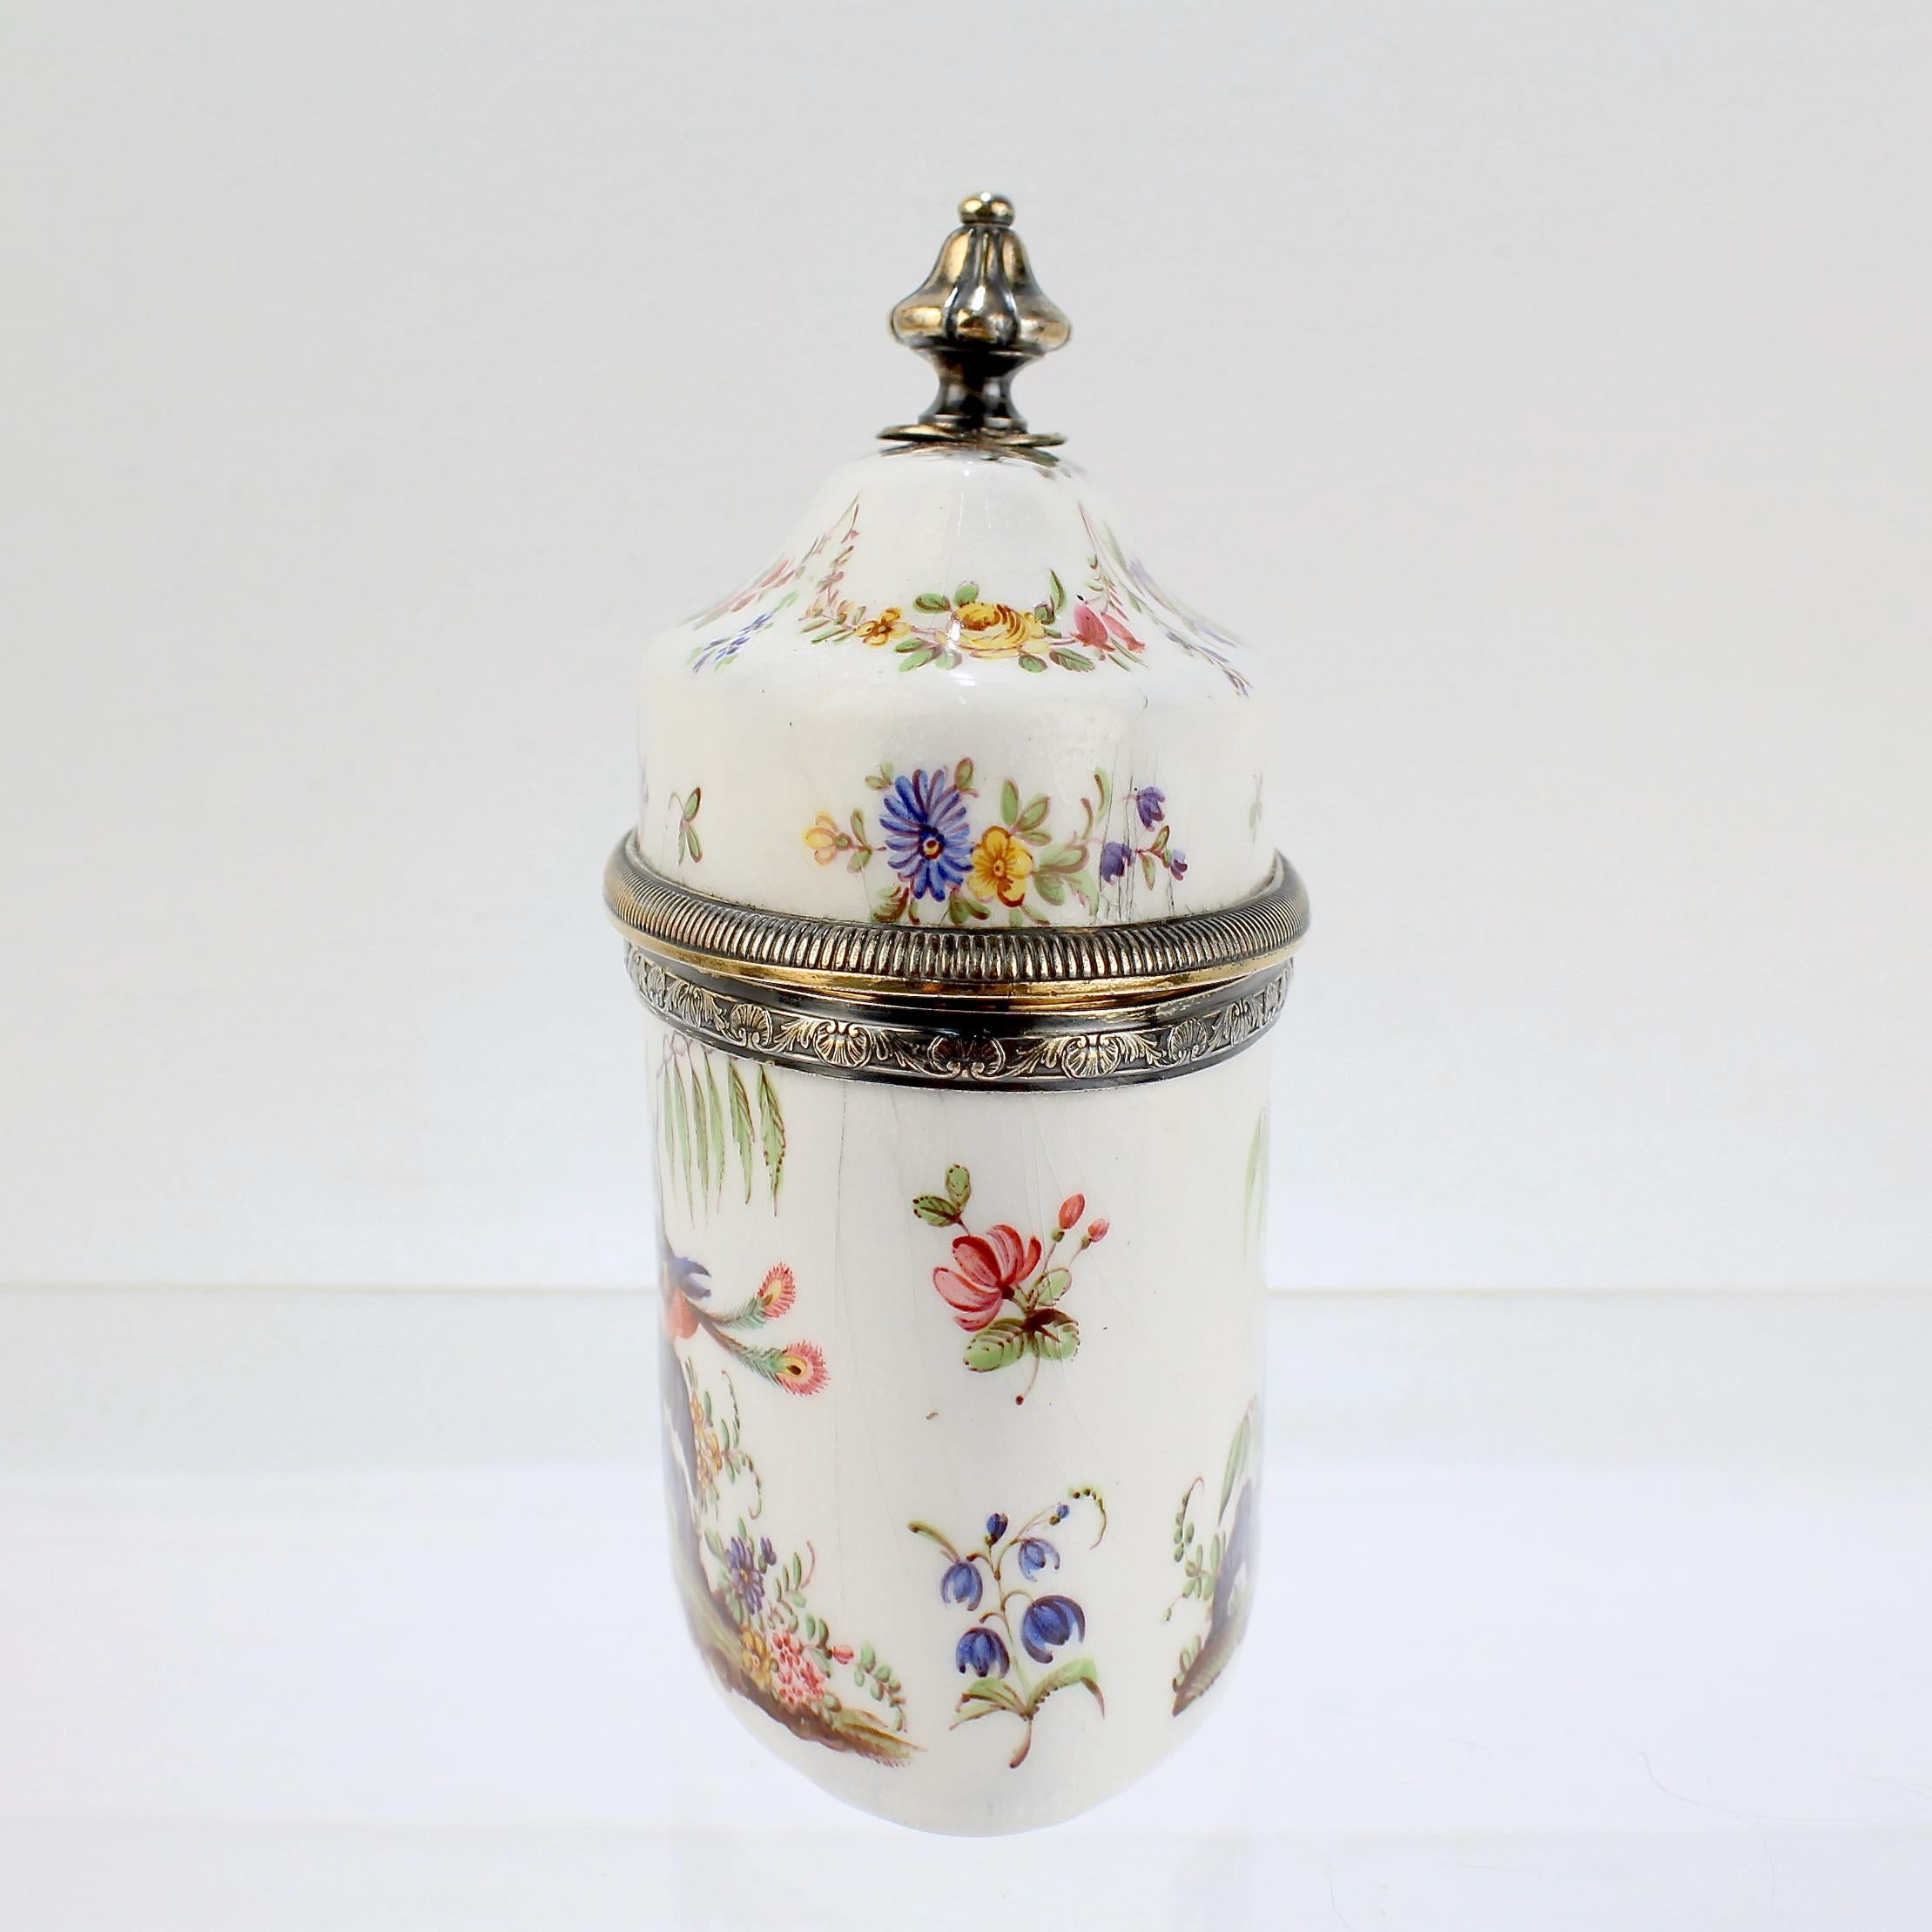 Antique 19th Century French Beaux-Arts Silver-Mounted Enamel Tea Caddy by Risler For Sale 1